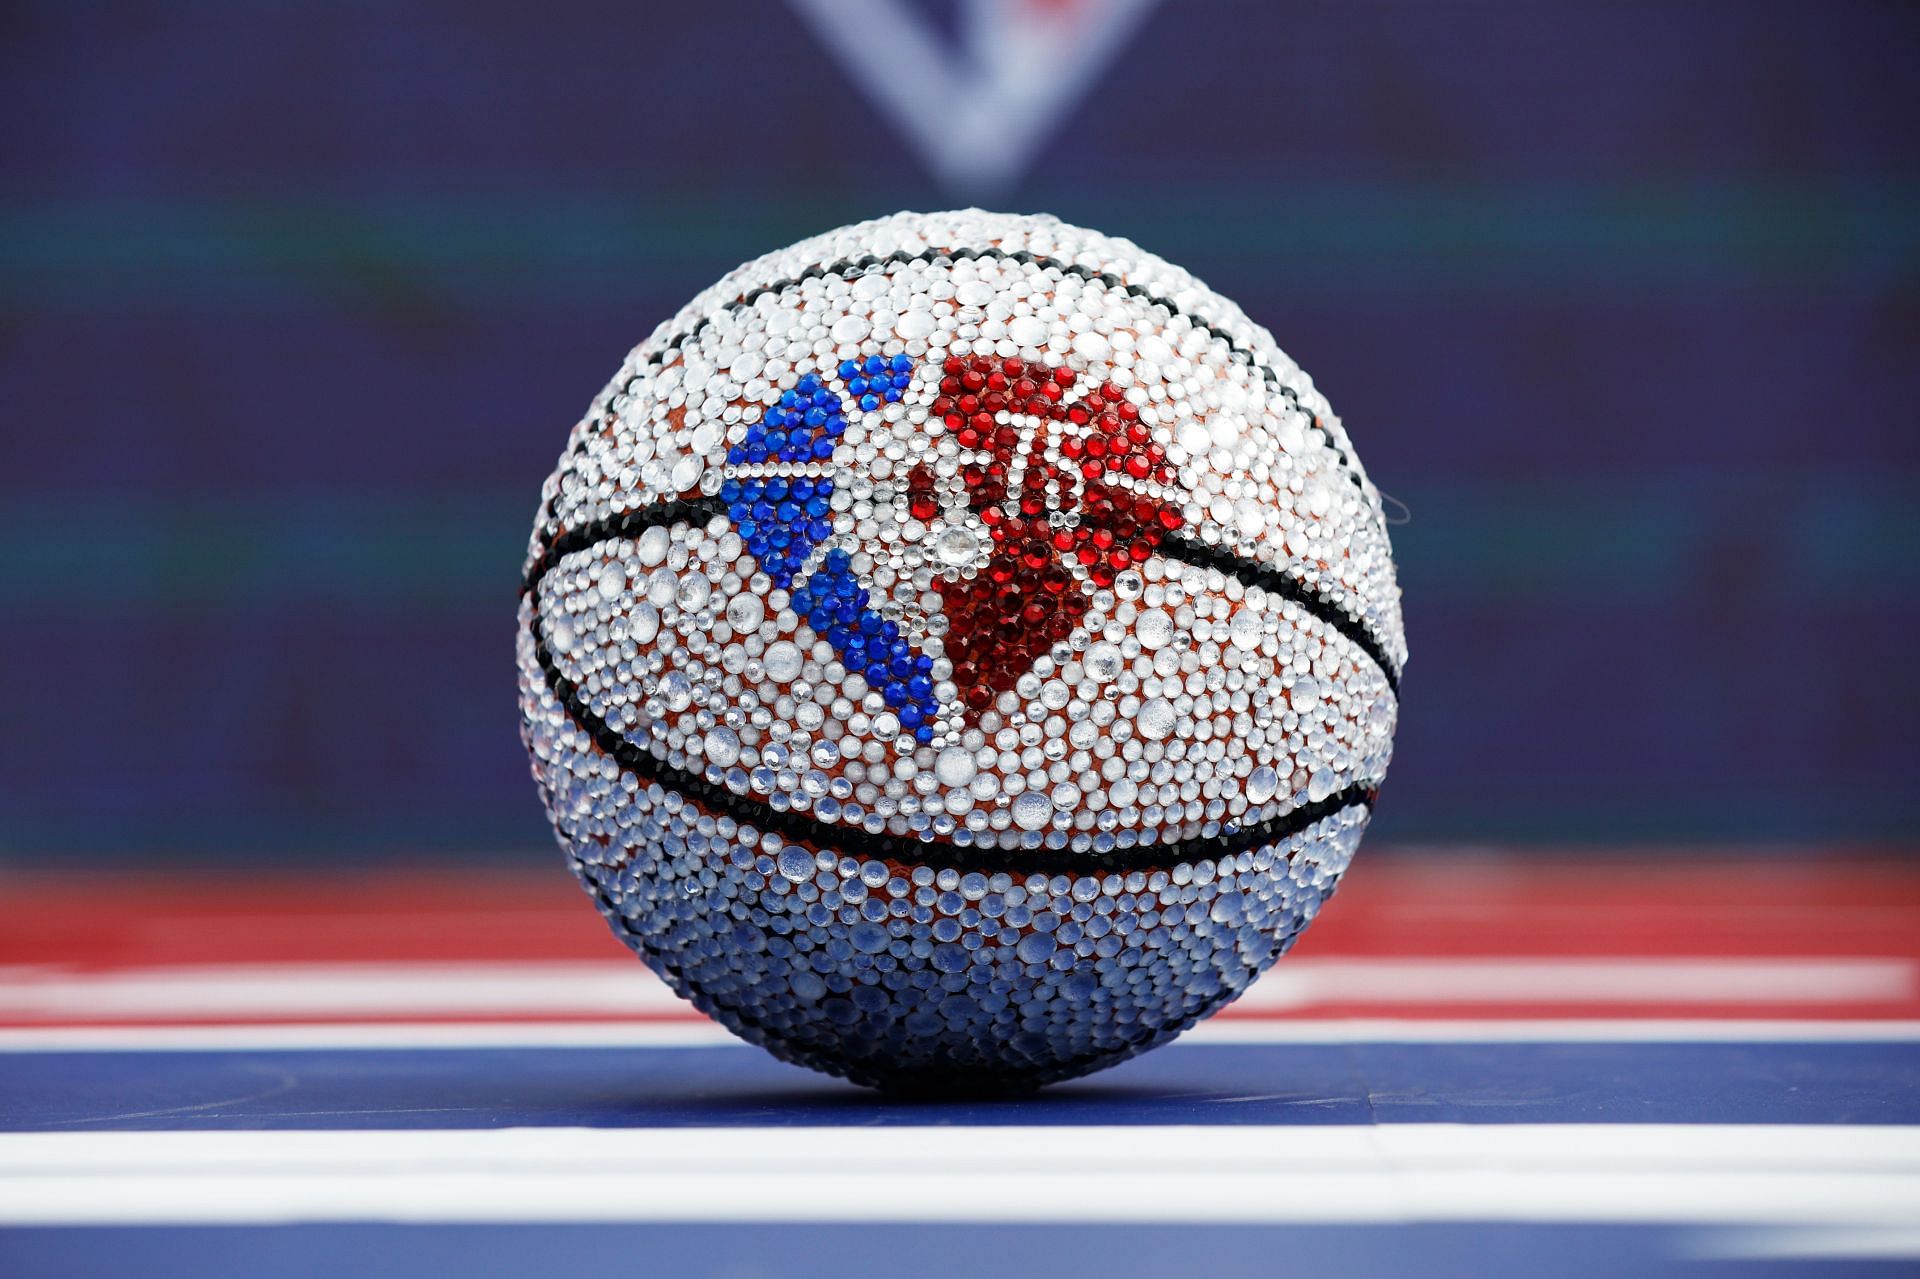 A basketball with NBA 75th anniversary detail is pictured during previews ahead of F1 race in Austin. (Photo by Jared C. Tilton/Getty Images)